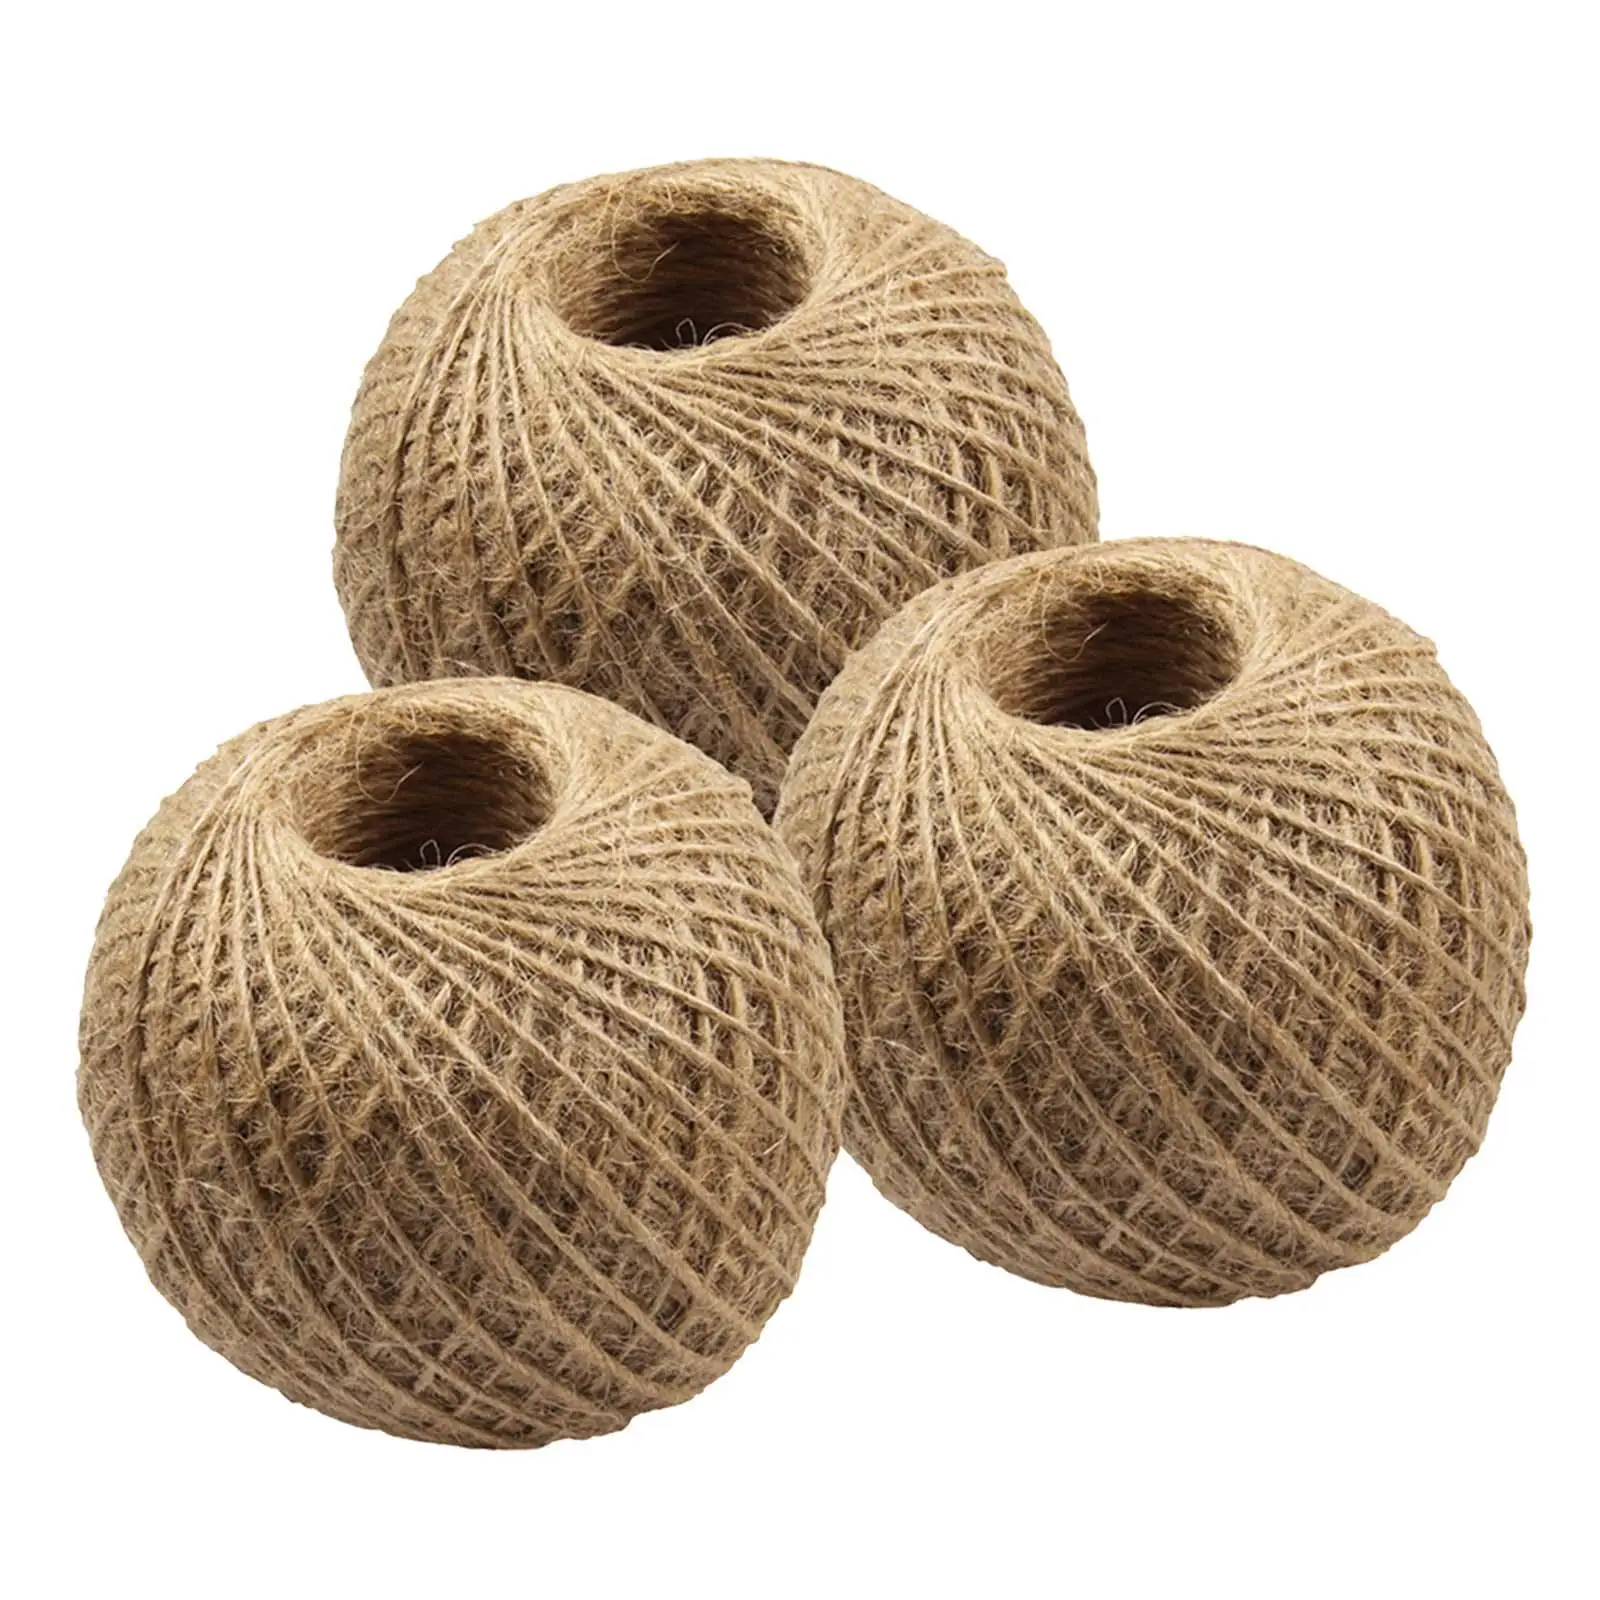 3 Pieces Jute Twine Rope 80M Burlap String Roll for Artworks Arts Crafts Plant Hanging Bakers Twine Industrial Packing Materials